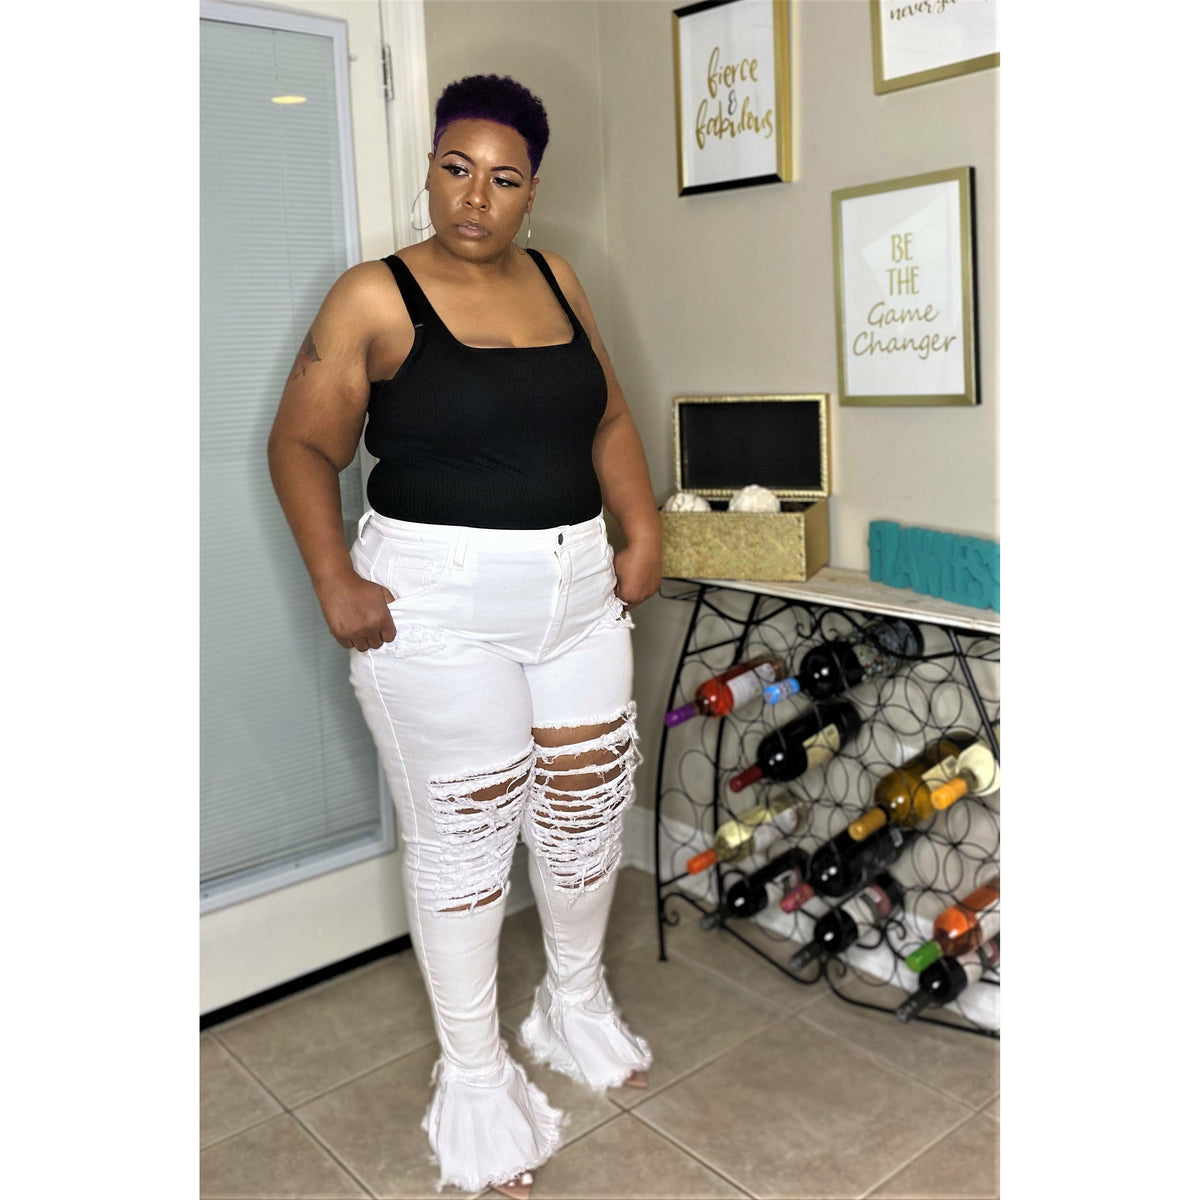 Curvy Flare bottoms by hi quality fashion boutique